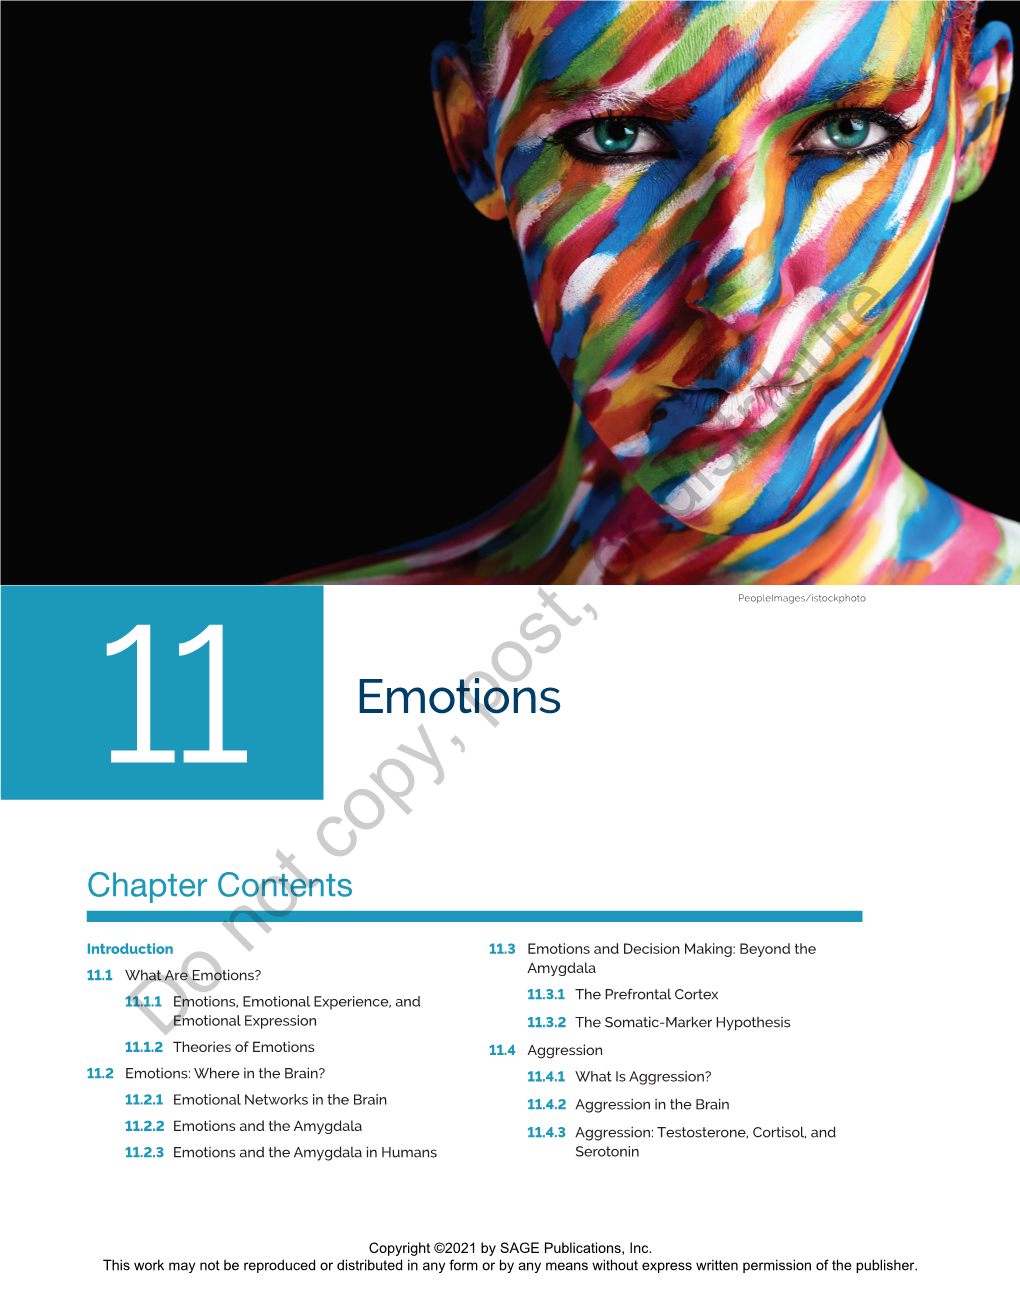 Emotionspost, Copy, Chapter Contents